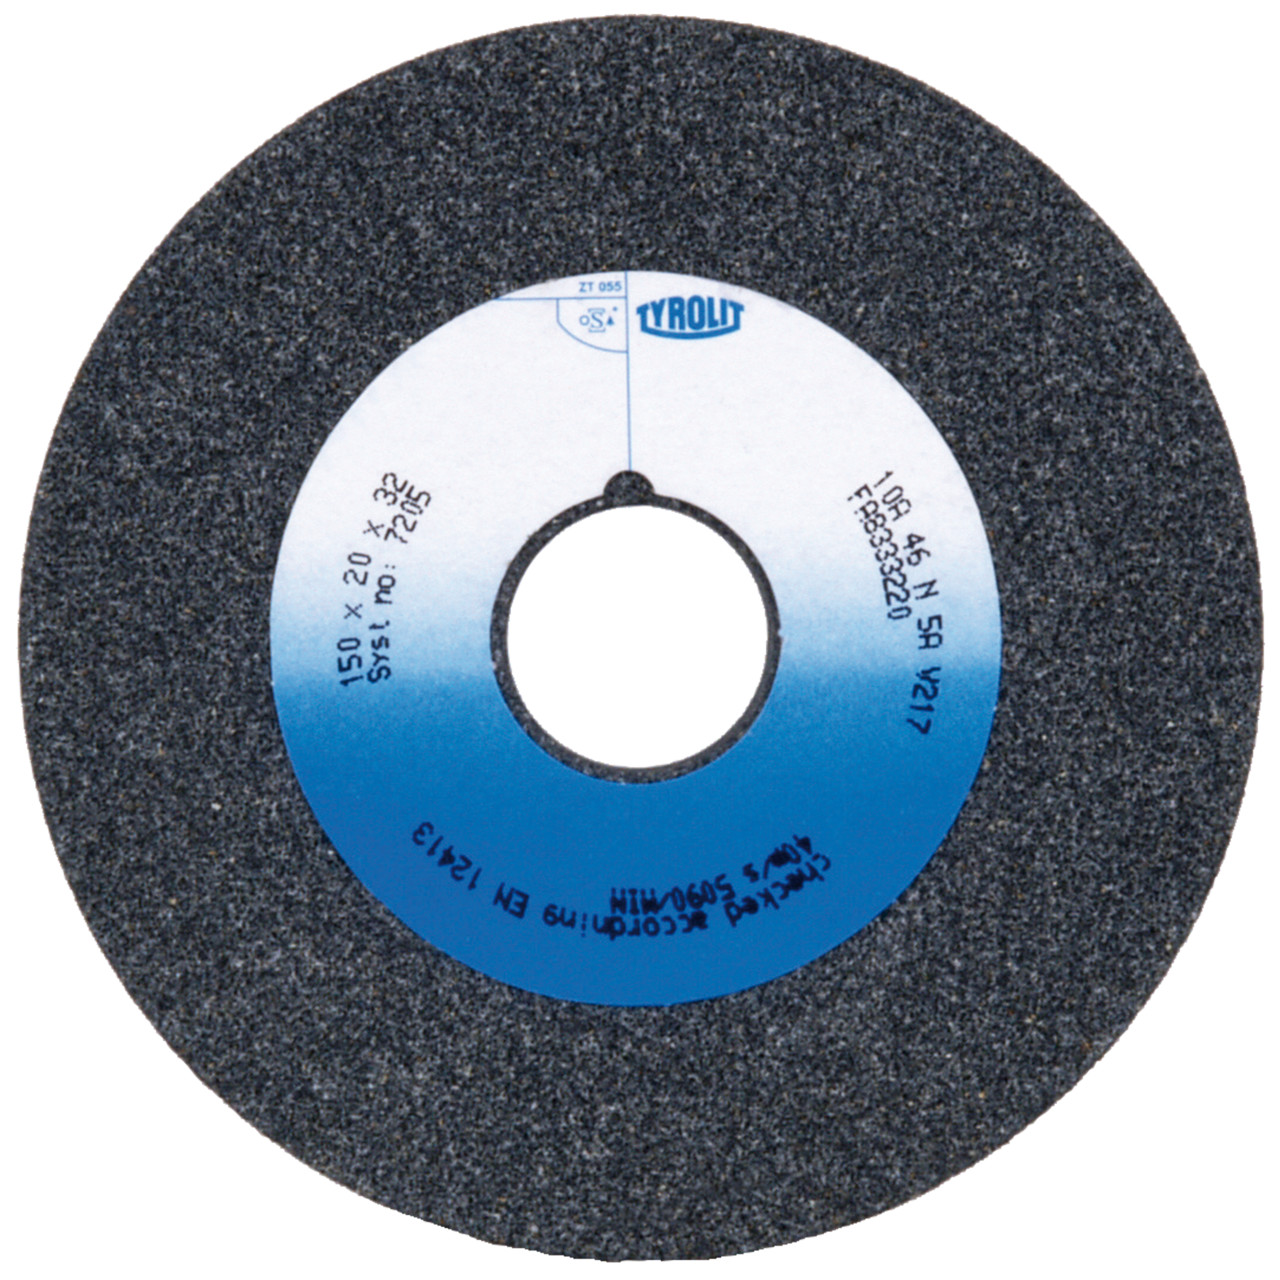 Tyrolit Conventional ceramic grinding discs DxDxH 200x25x32 For unalloyed and low-alloy steels, shape: 1, Art. 31694